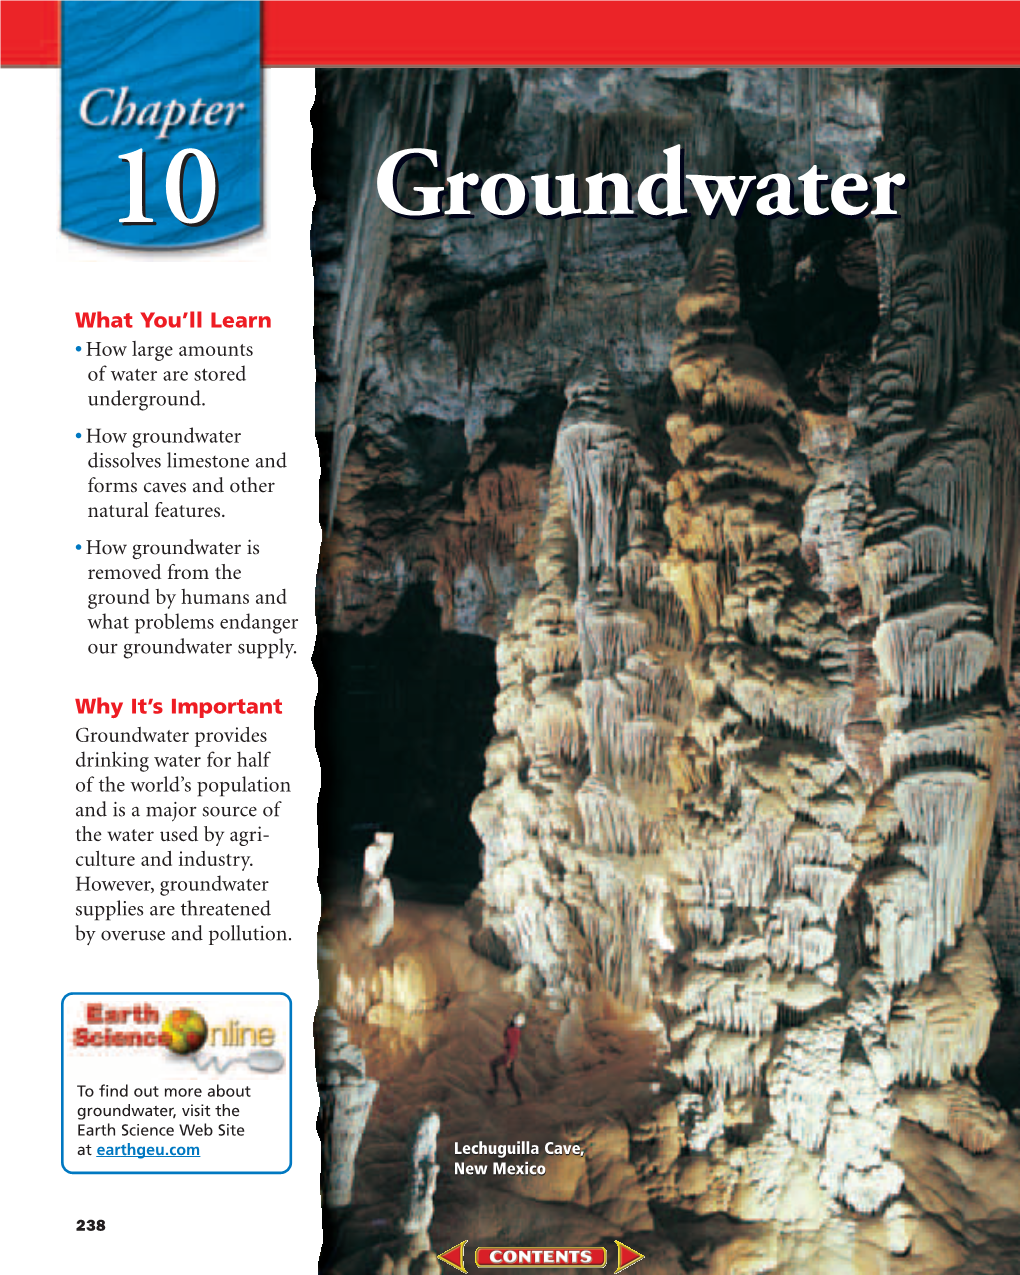 Chapter 10: Groundwater